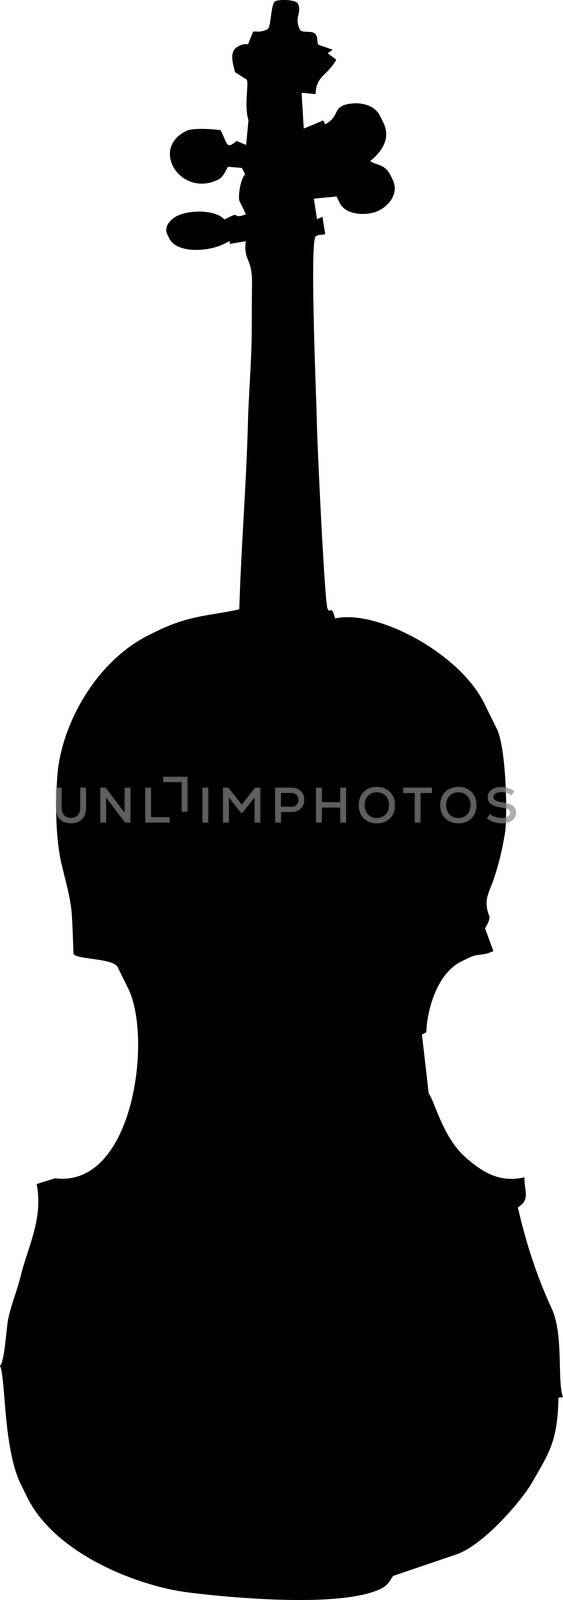 violin silhouette - isolated vector illustration